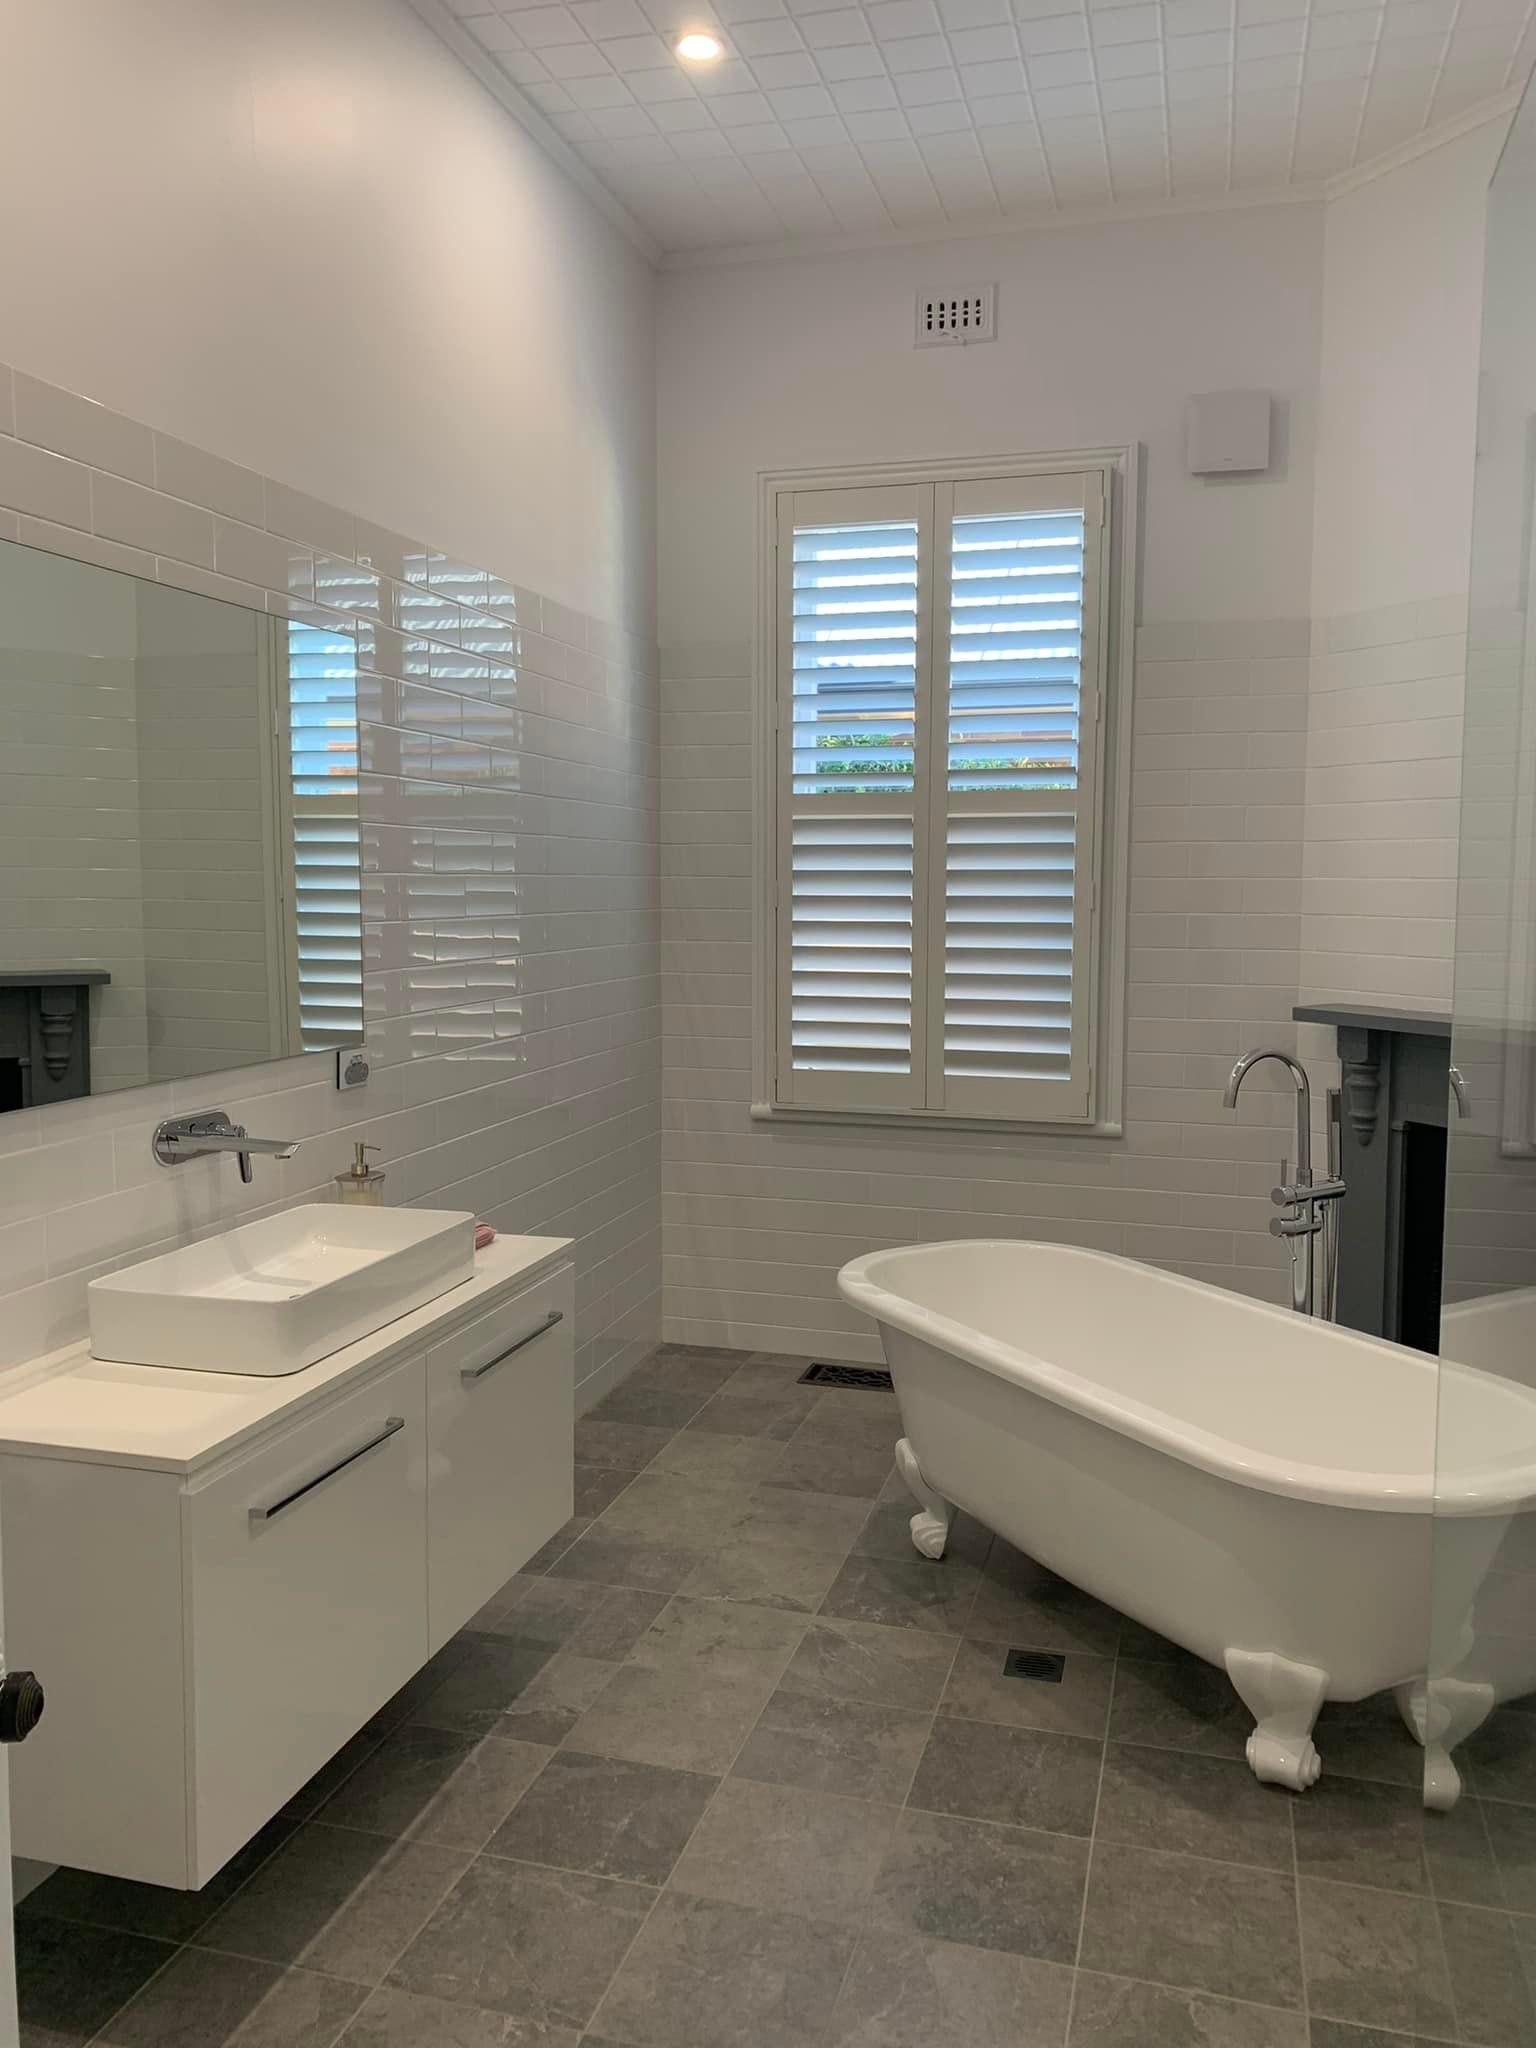 Bathroom Shutters — Co-ordinations Blinds & Awnings in Falls Creek, NSW